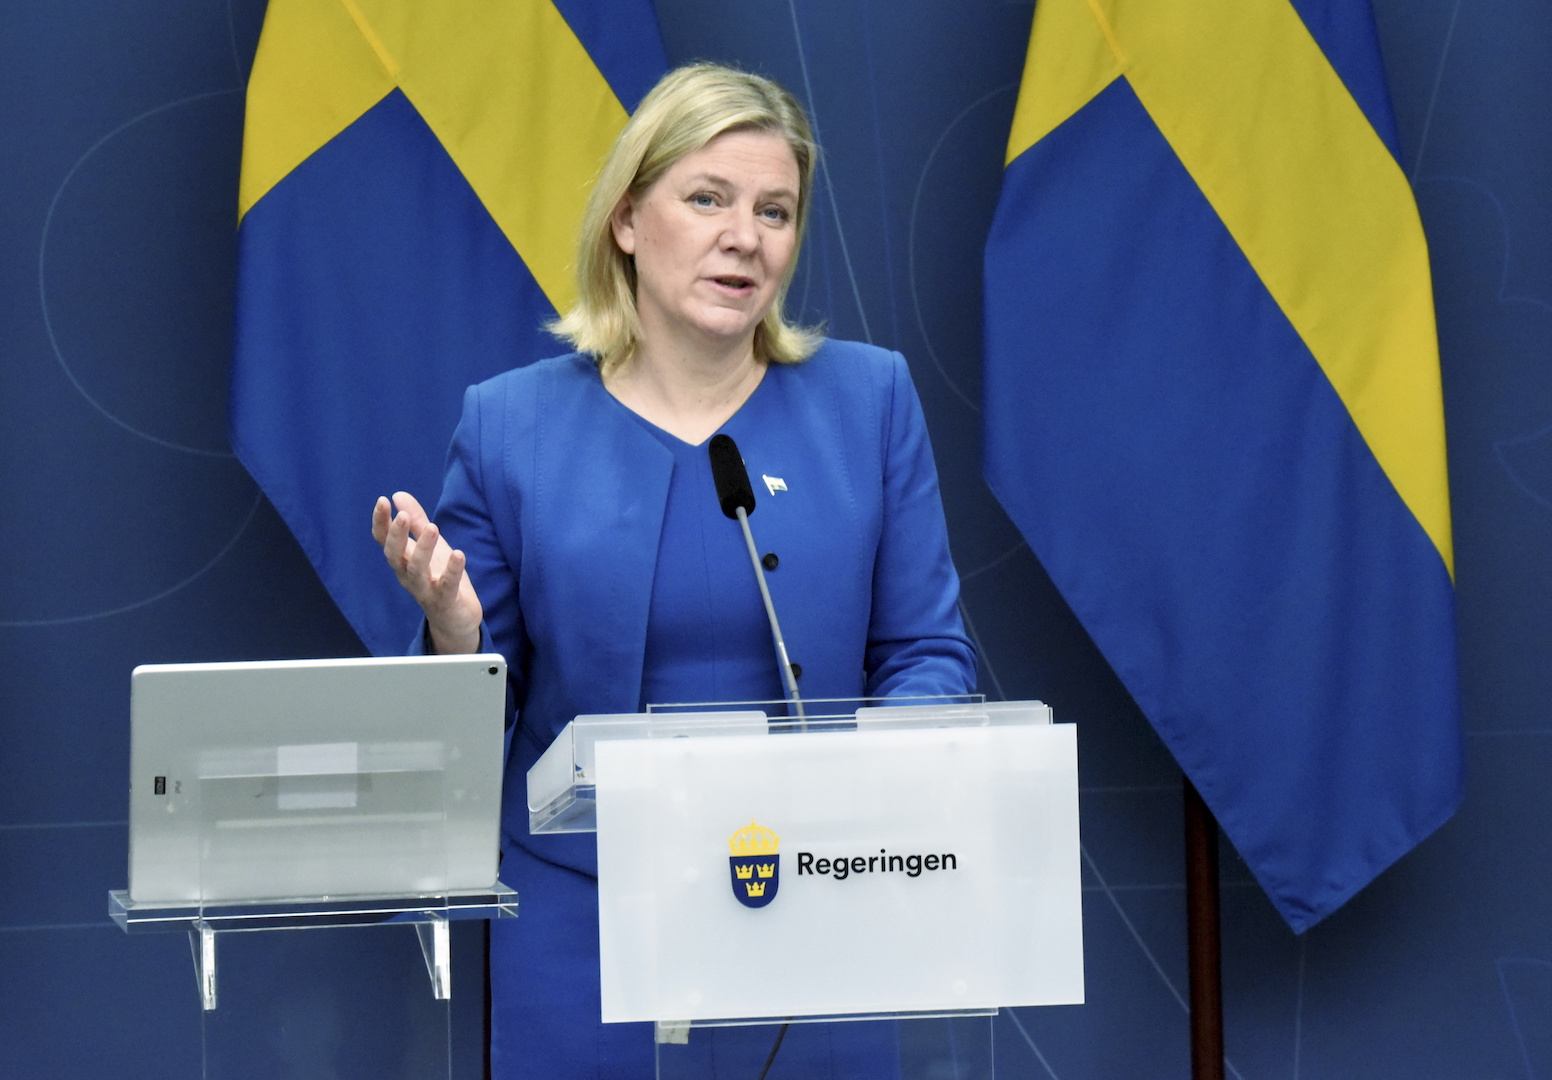 Sweden to End All COVID-19 Restrictions Next Week